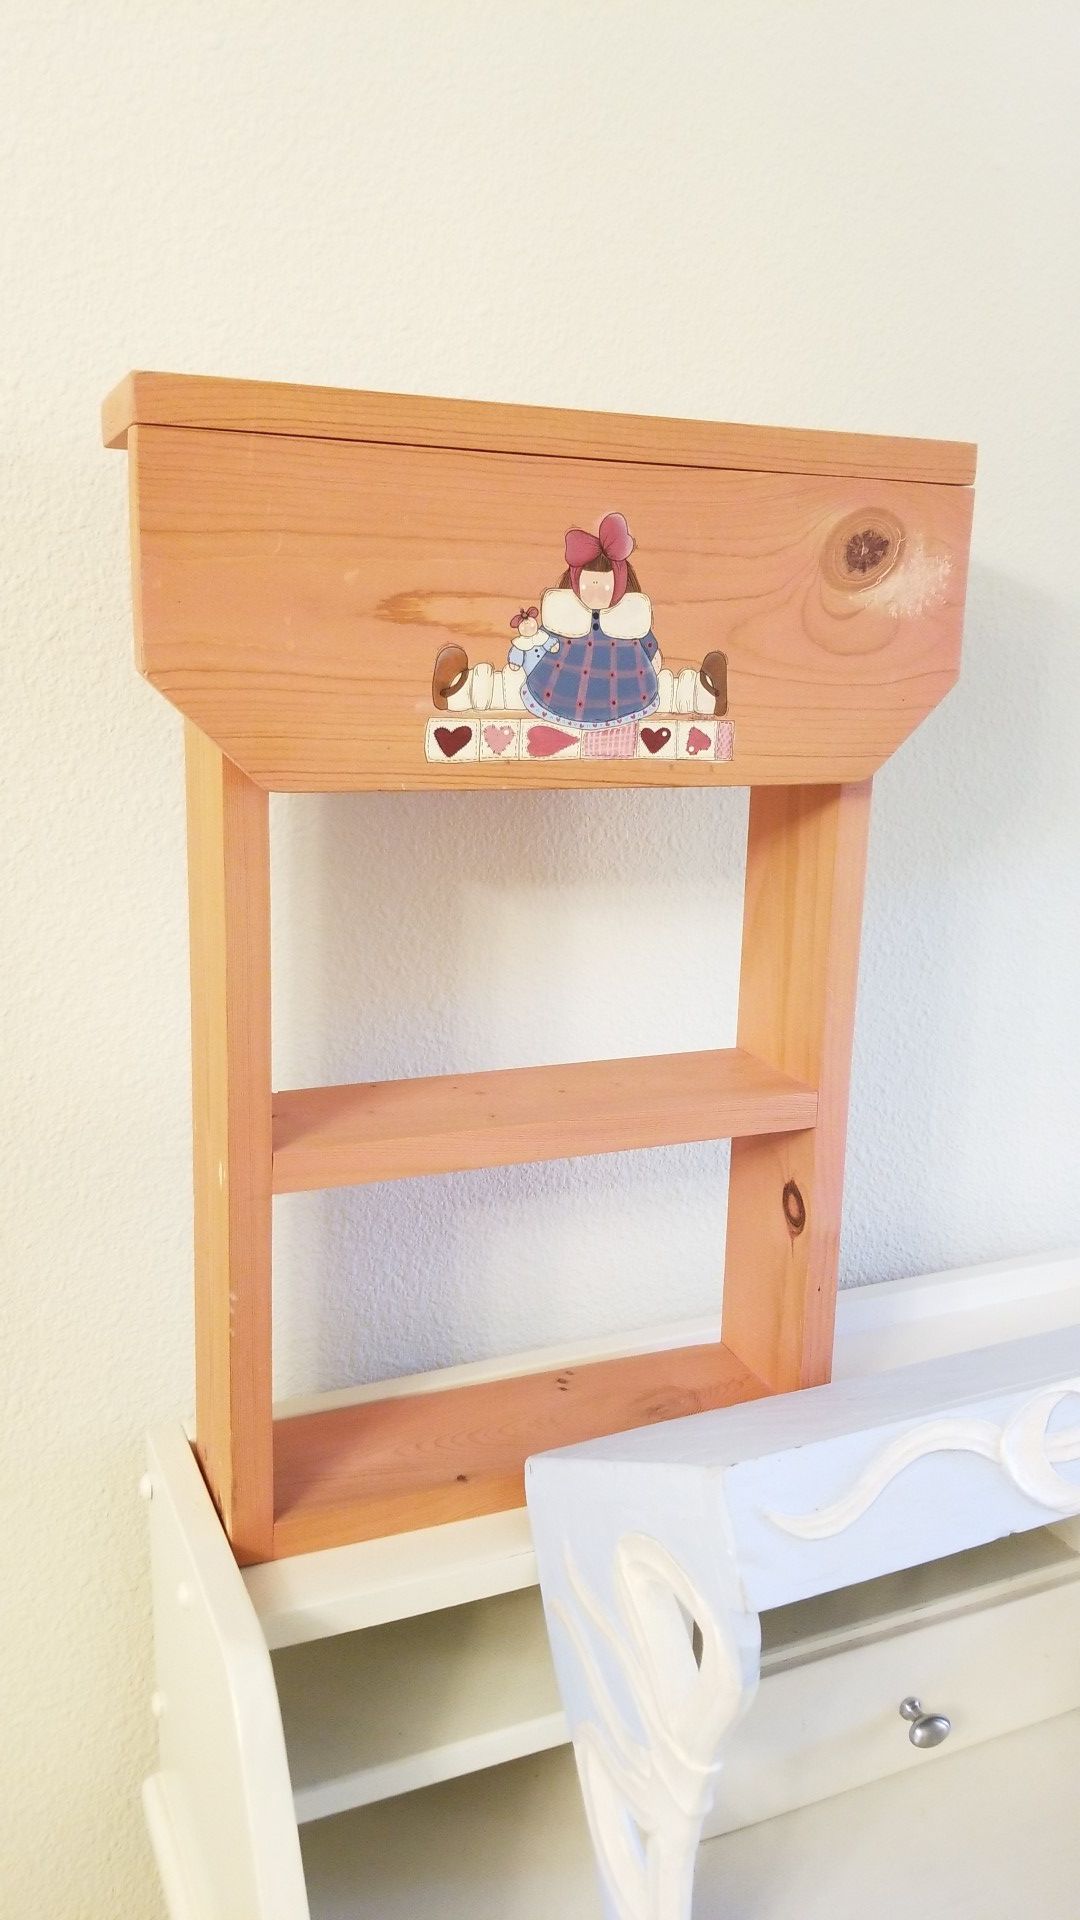 Hand painted girls room shelves. Adorable!